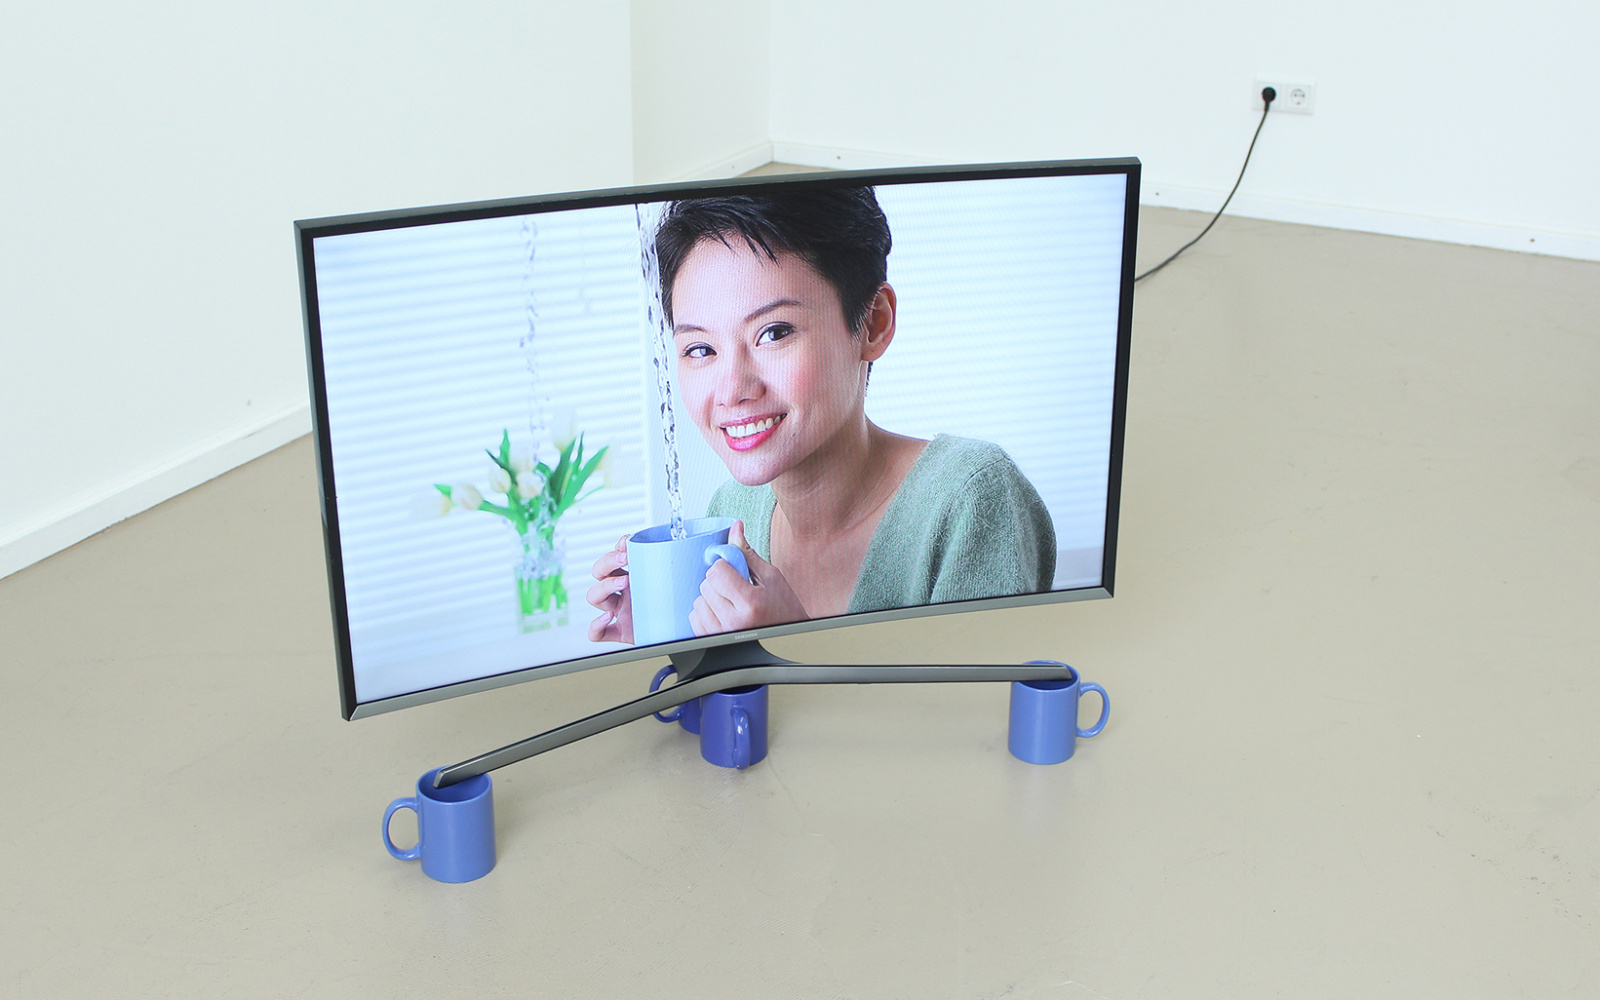 Phonemenology — The Umbrella Paradigm Riccardo Benassi, 2015, HD digital video loop 4’24’’, Samsung curved Led TV, 4 coffee mugs, Coproduced by Xing, Courtesy private collection Bergamo (IT)